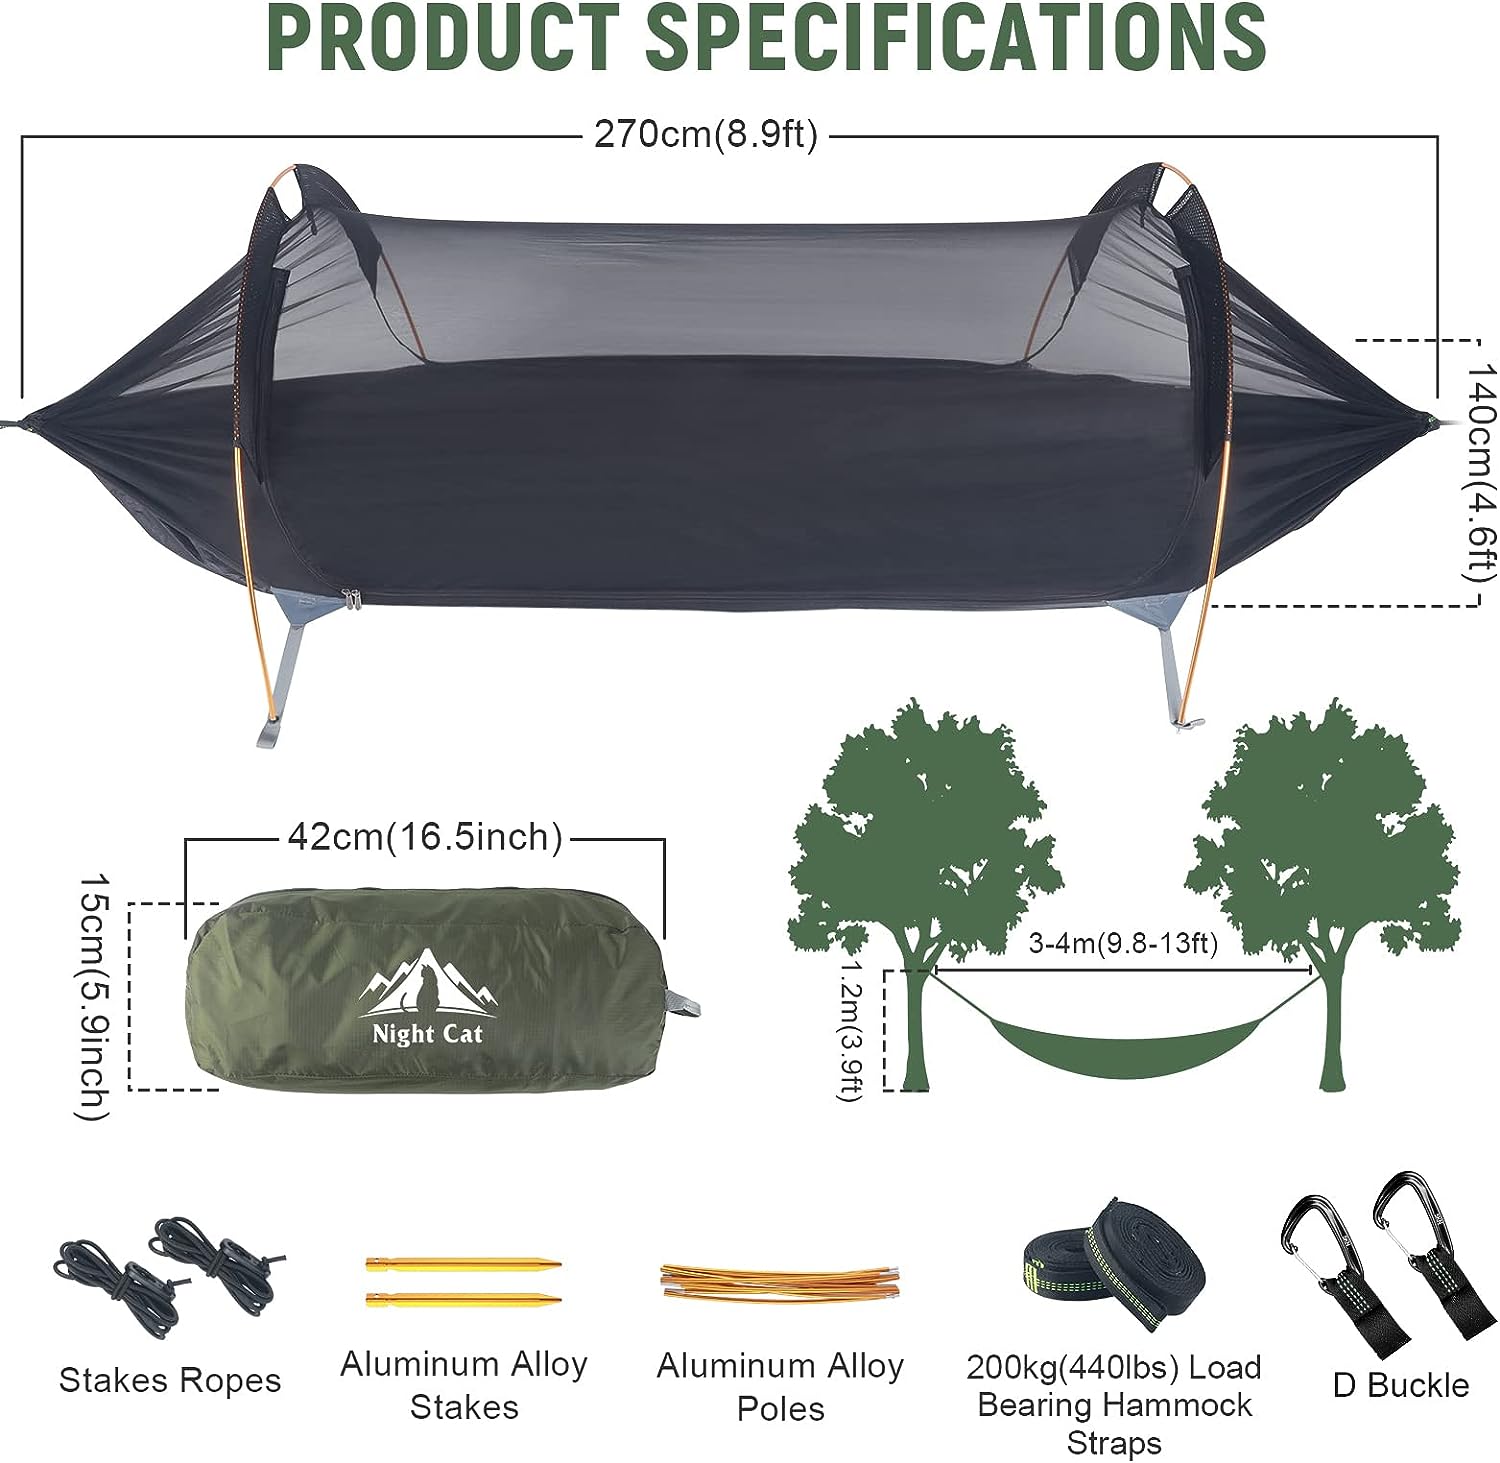 night cat camping hammock tent product specifications